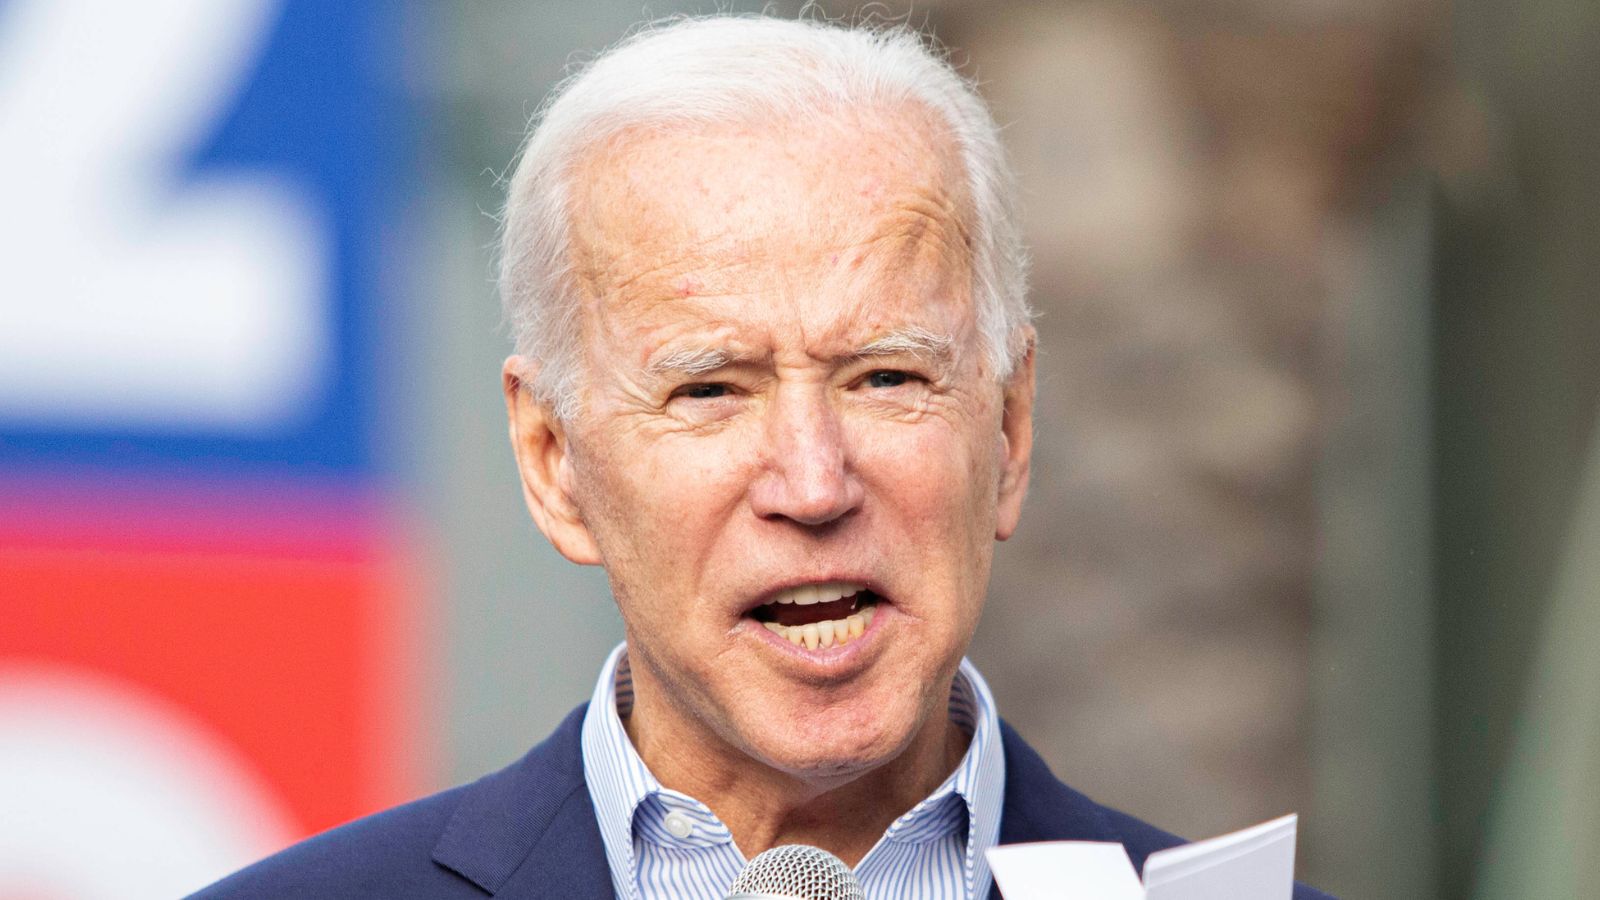 “Impeach, Prosecute and Imprison”: Biden Faces Allegations of Corruption and Influence-Peddling